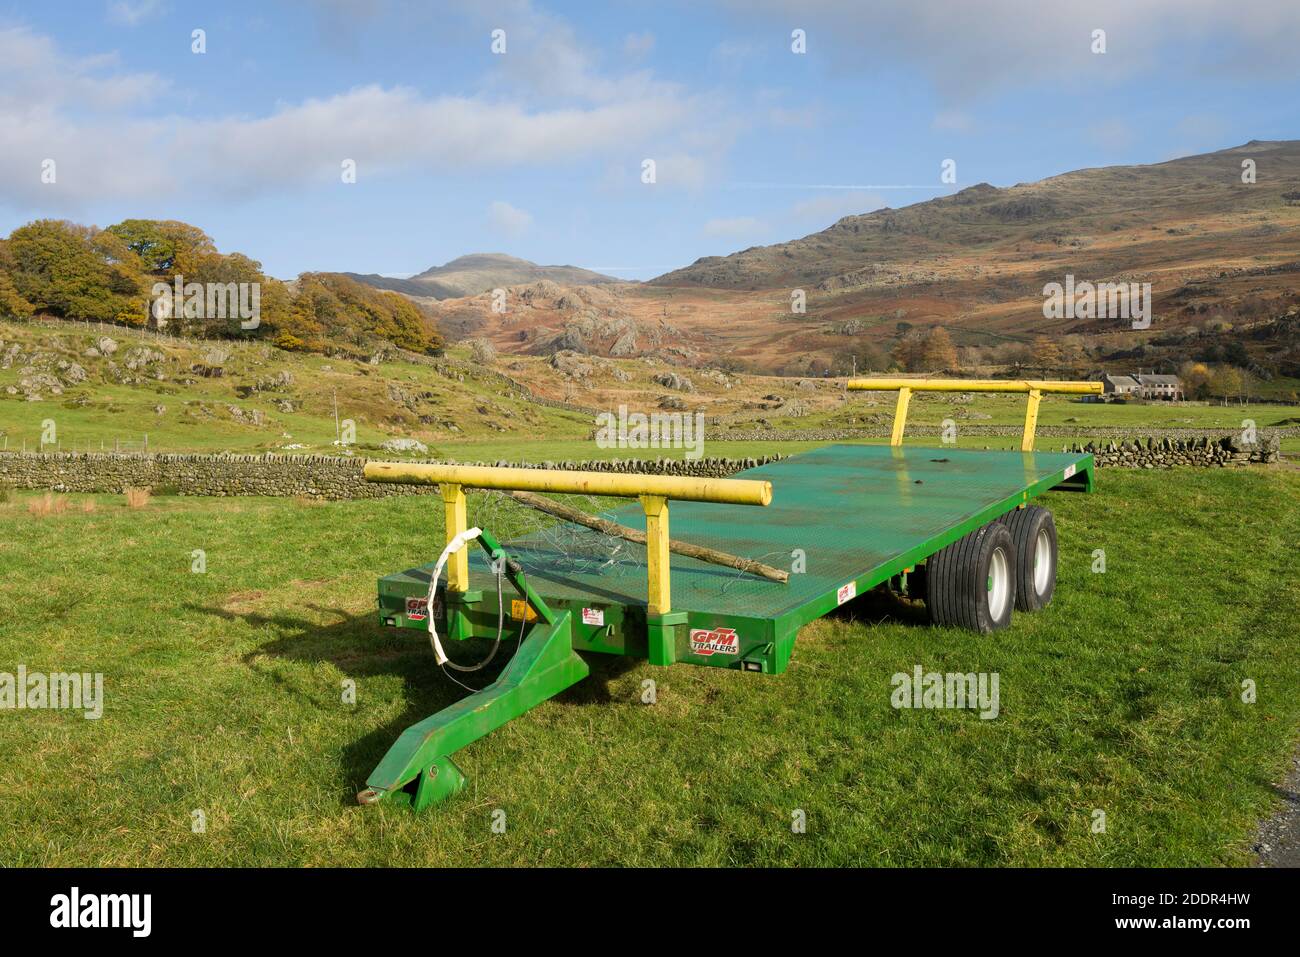 A double axle farm trailer in a field in the Duddon Valley in the Lake District National Park, Cumbria, England. Stock Photo